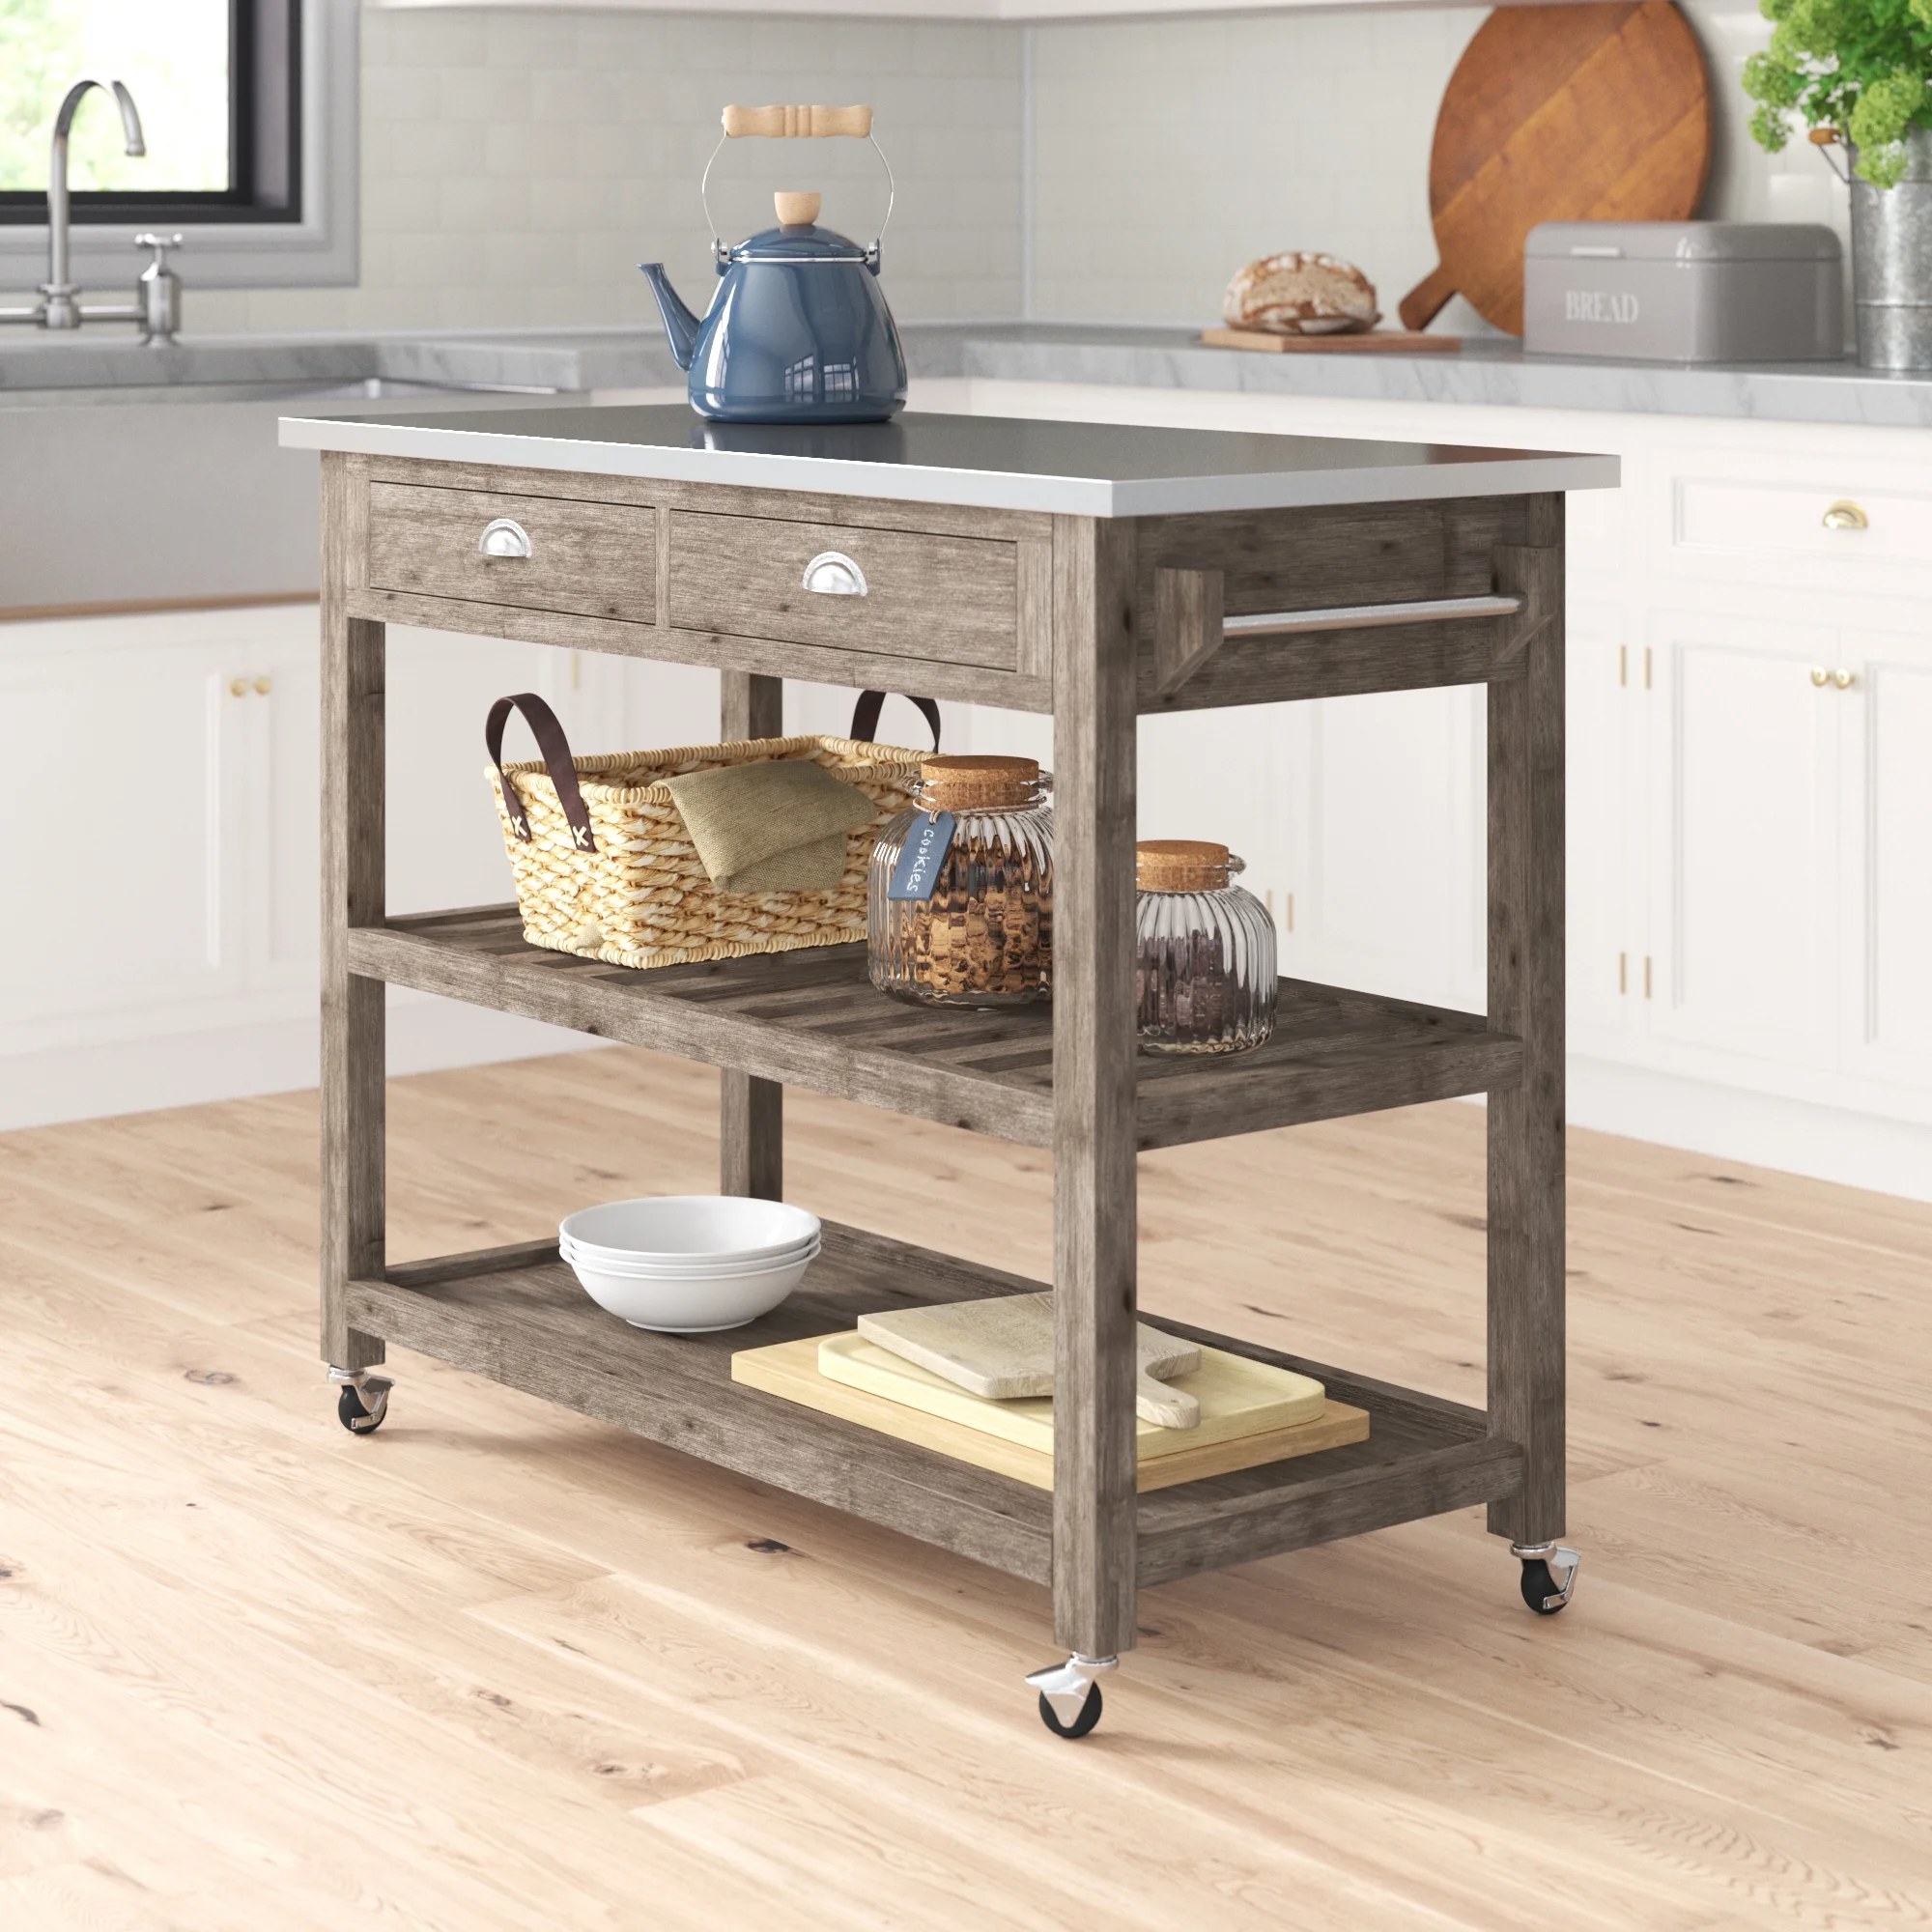 The kitchen cart on wheels with two shelves and a stainless steel surface